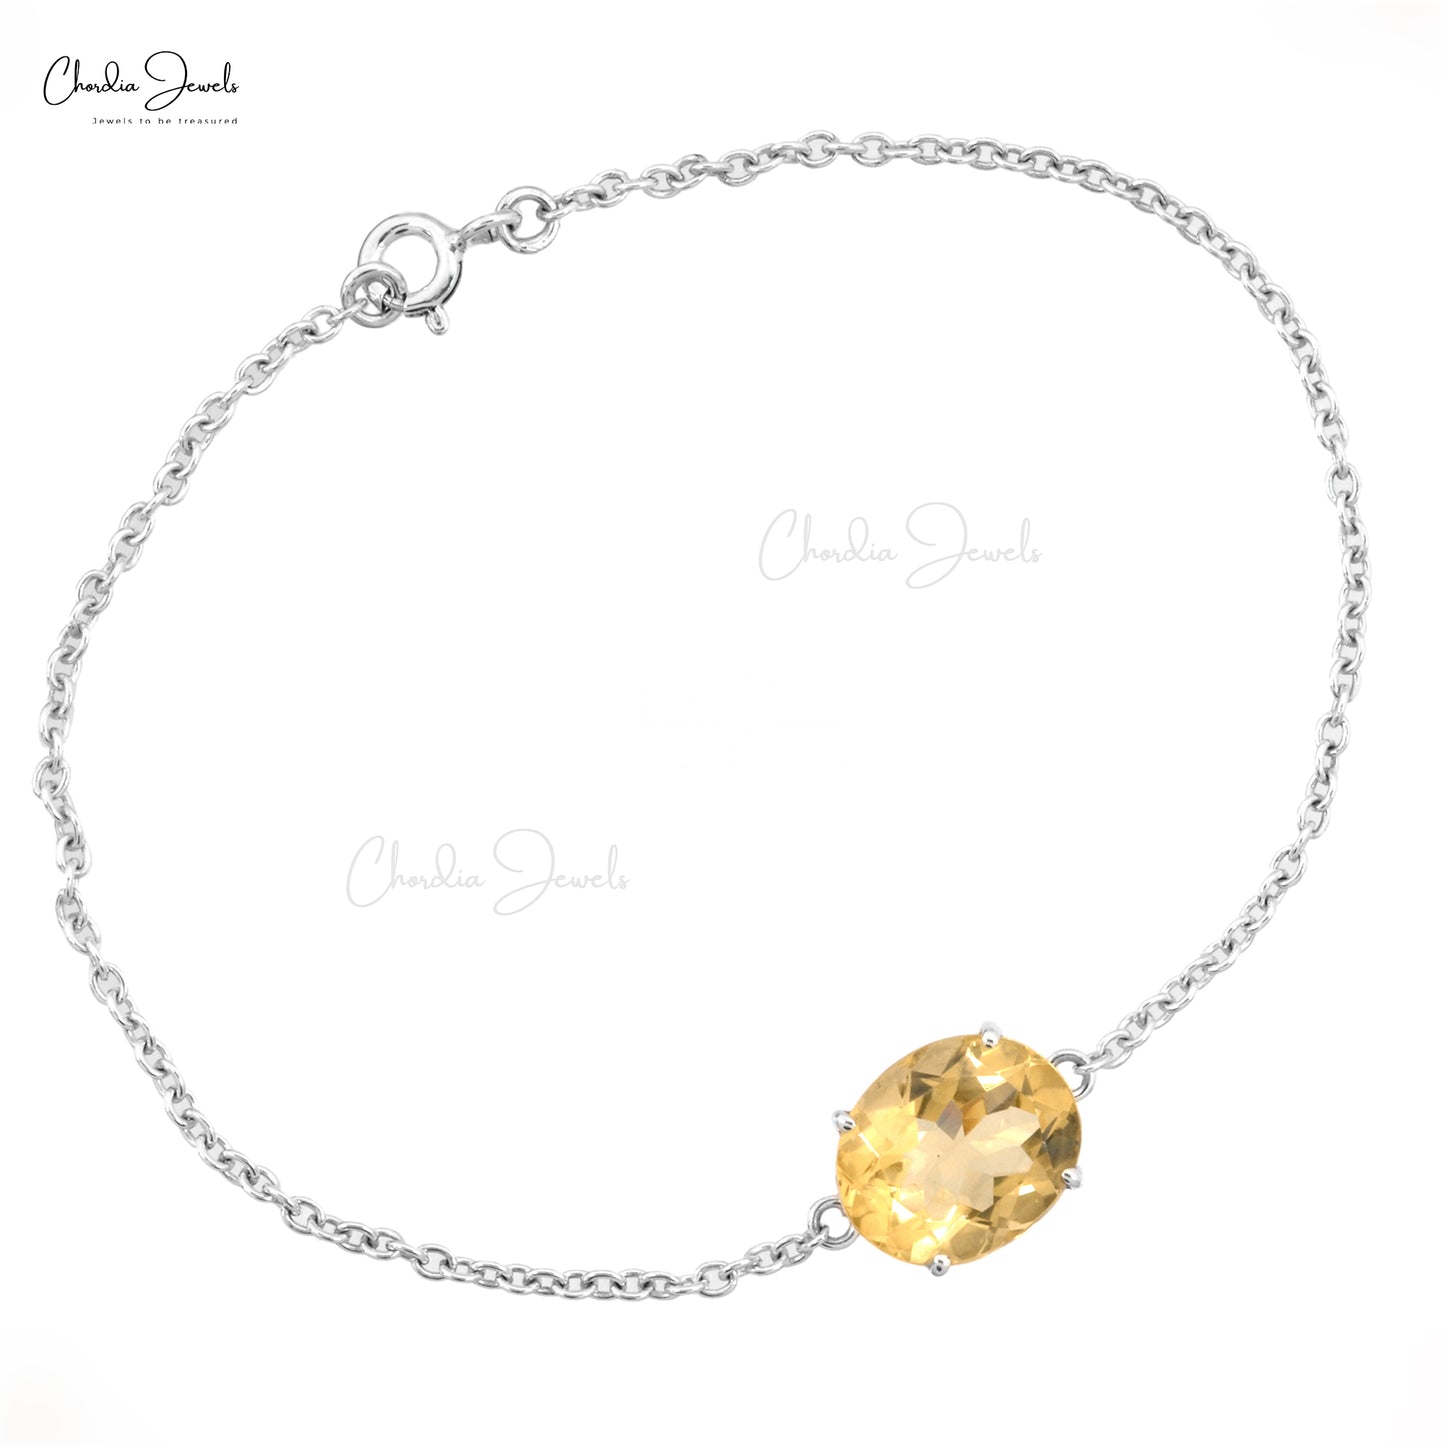 Hot Selling 925 Sterling Silver Chain Bracelet With Natural Citrine Gemstone Jewelry At Affordable Price